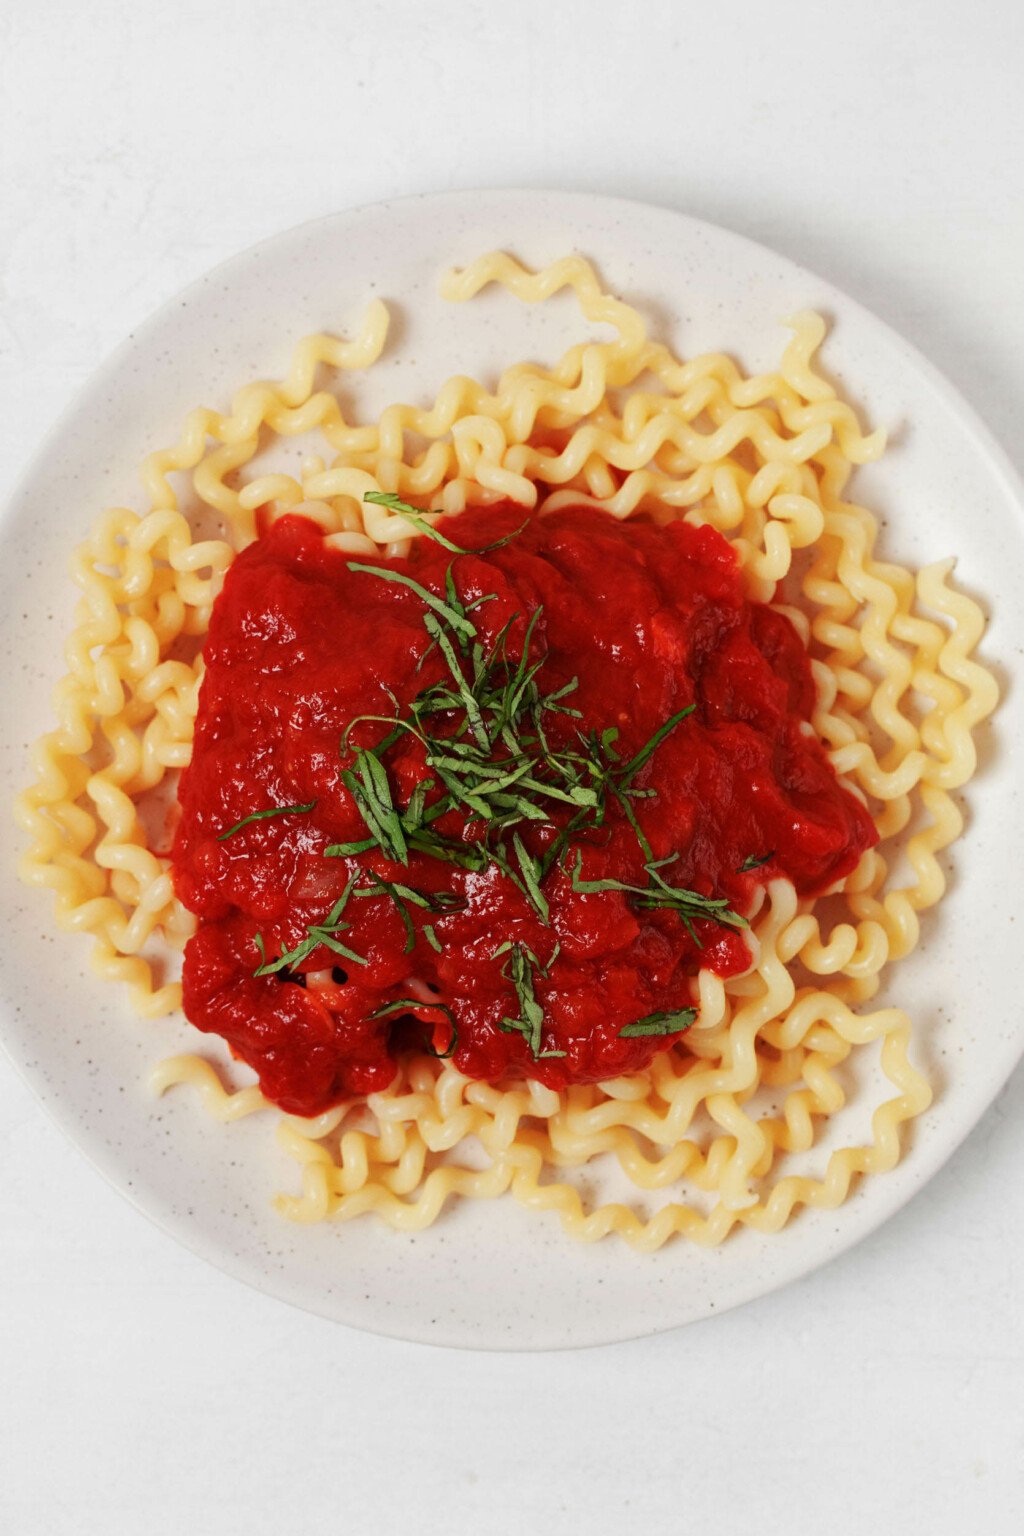 A white plate has been covered in pasta and a red sauce, along with green sliced basil.